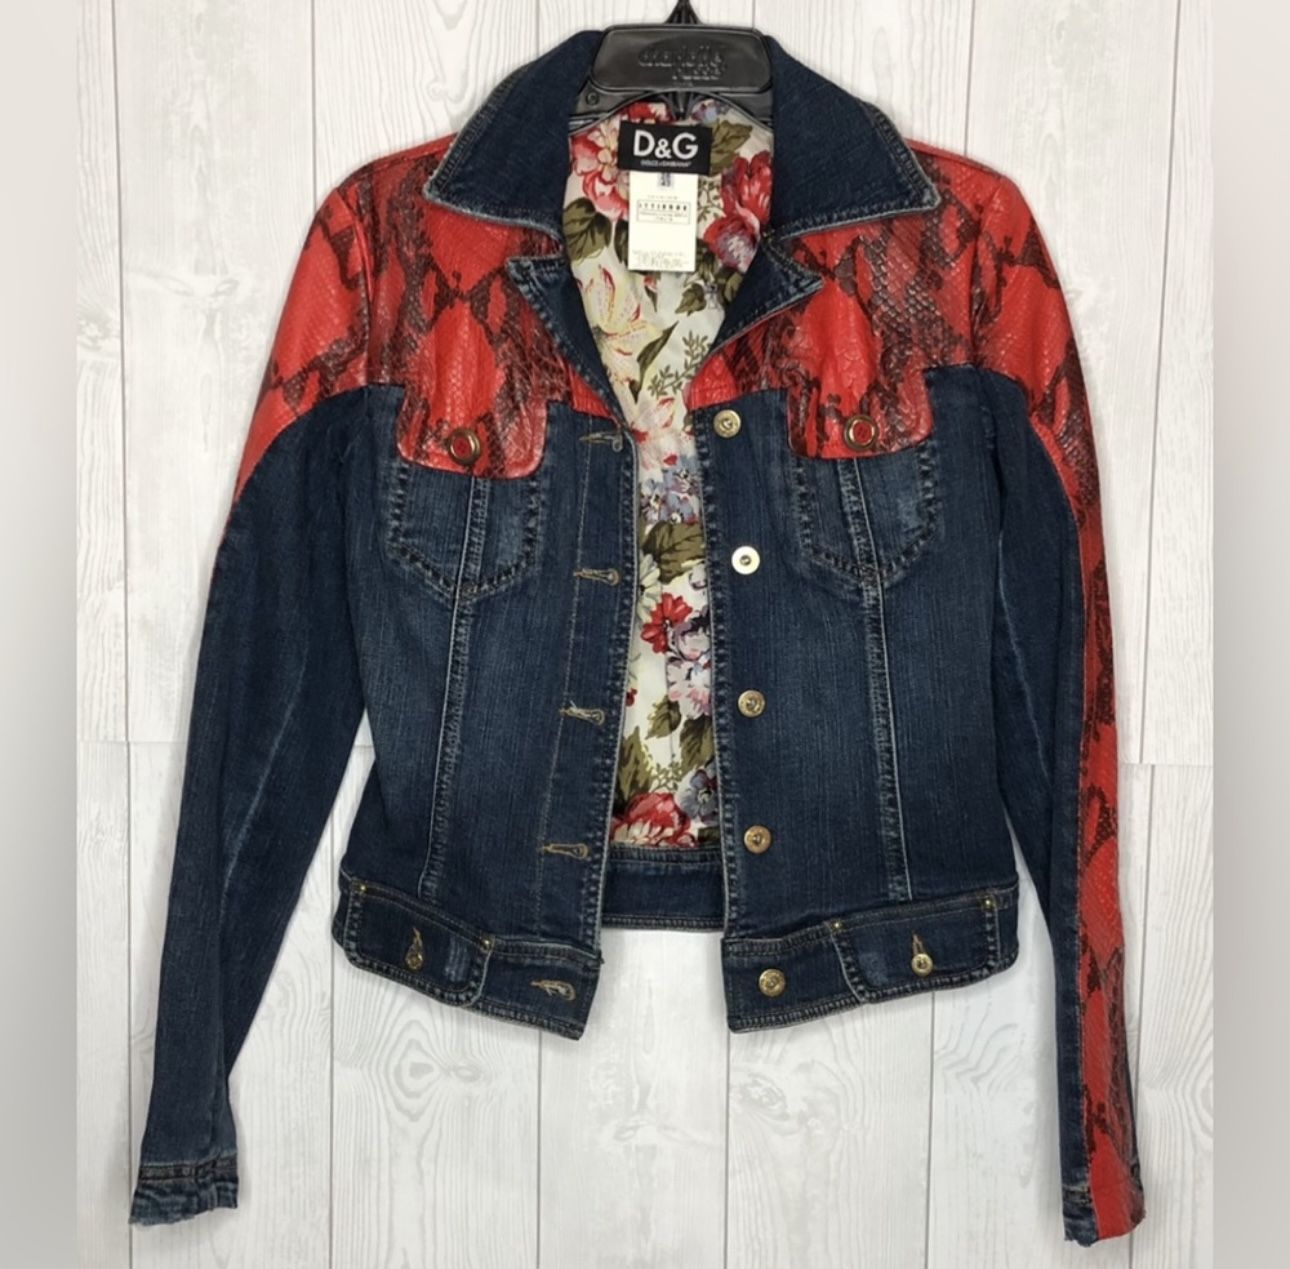 A RARE! Authentic Women's Dolce & Gabbana Denim Jacket with Snake Skin 